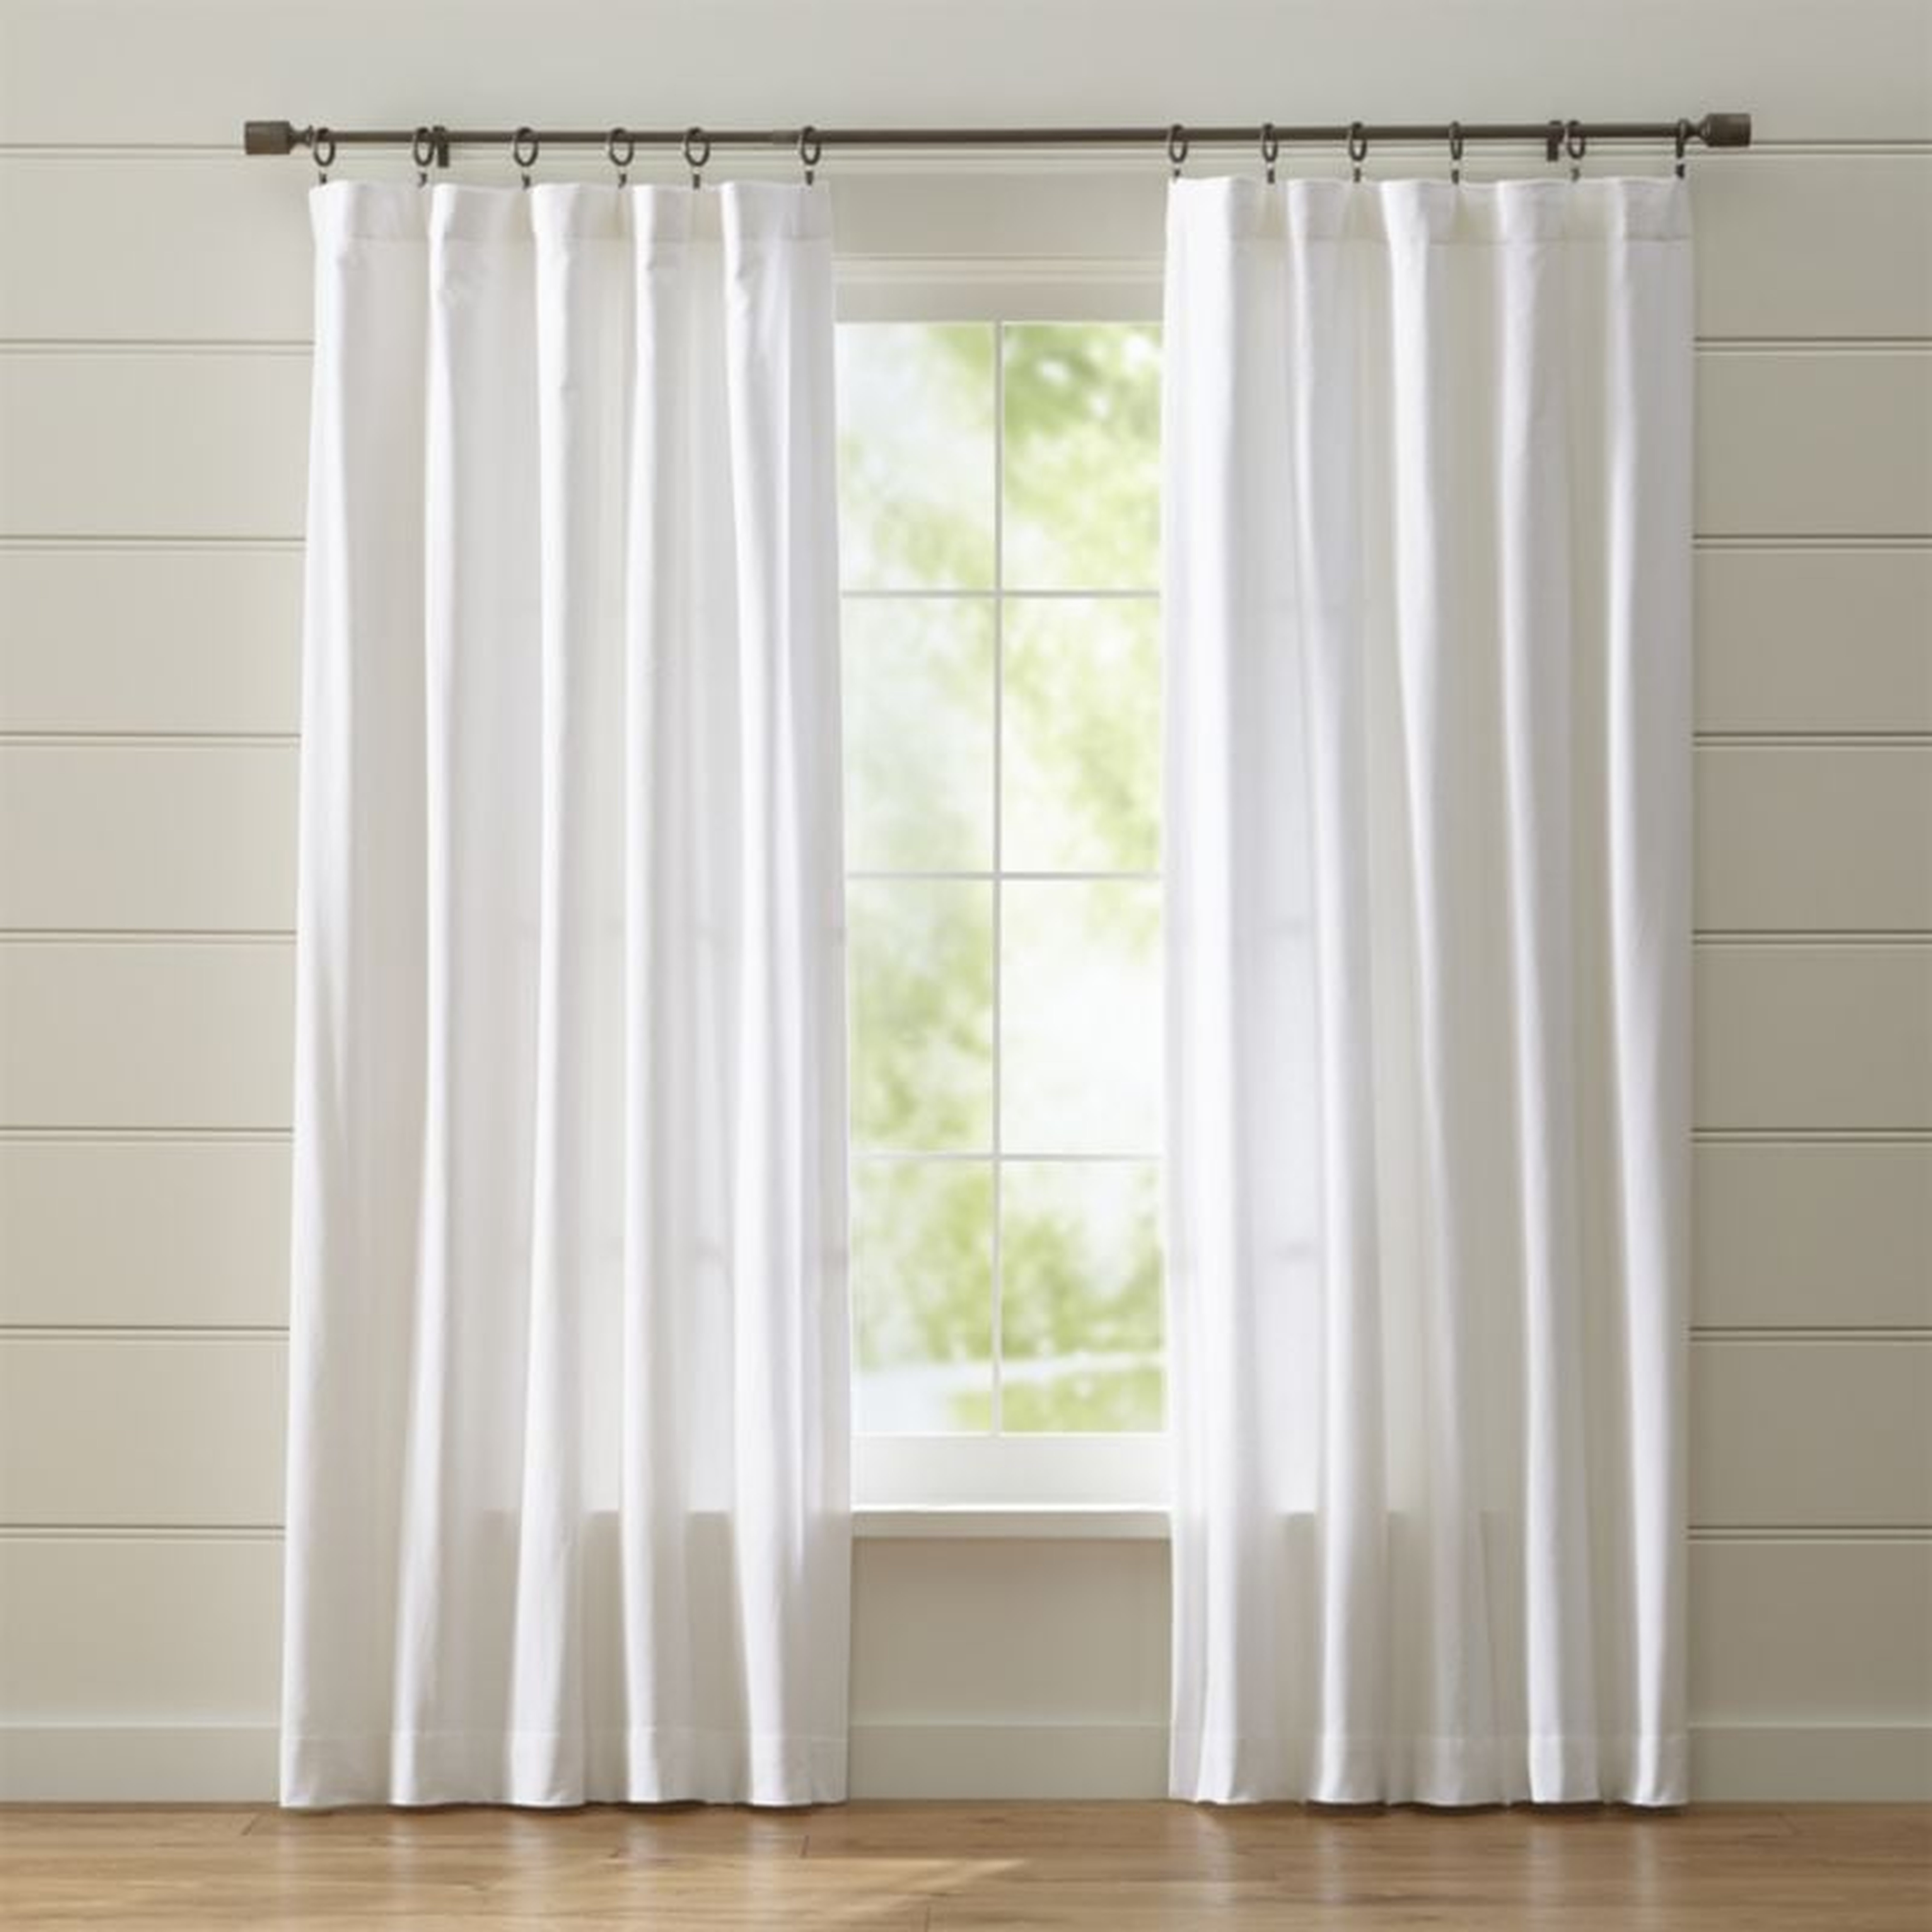 Wallace Curtain Panel, White, 52" x 96" - Crate and Barrel